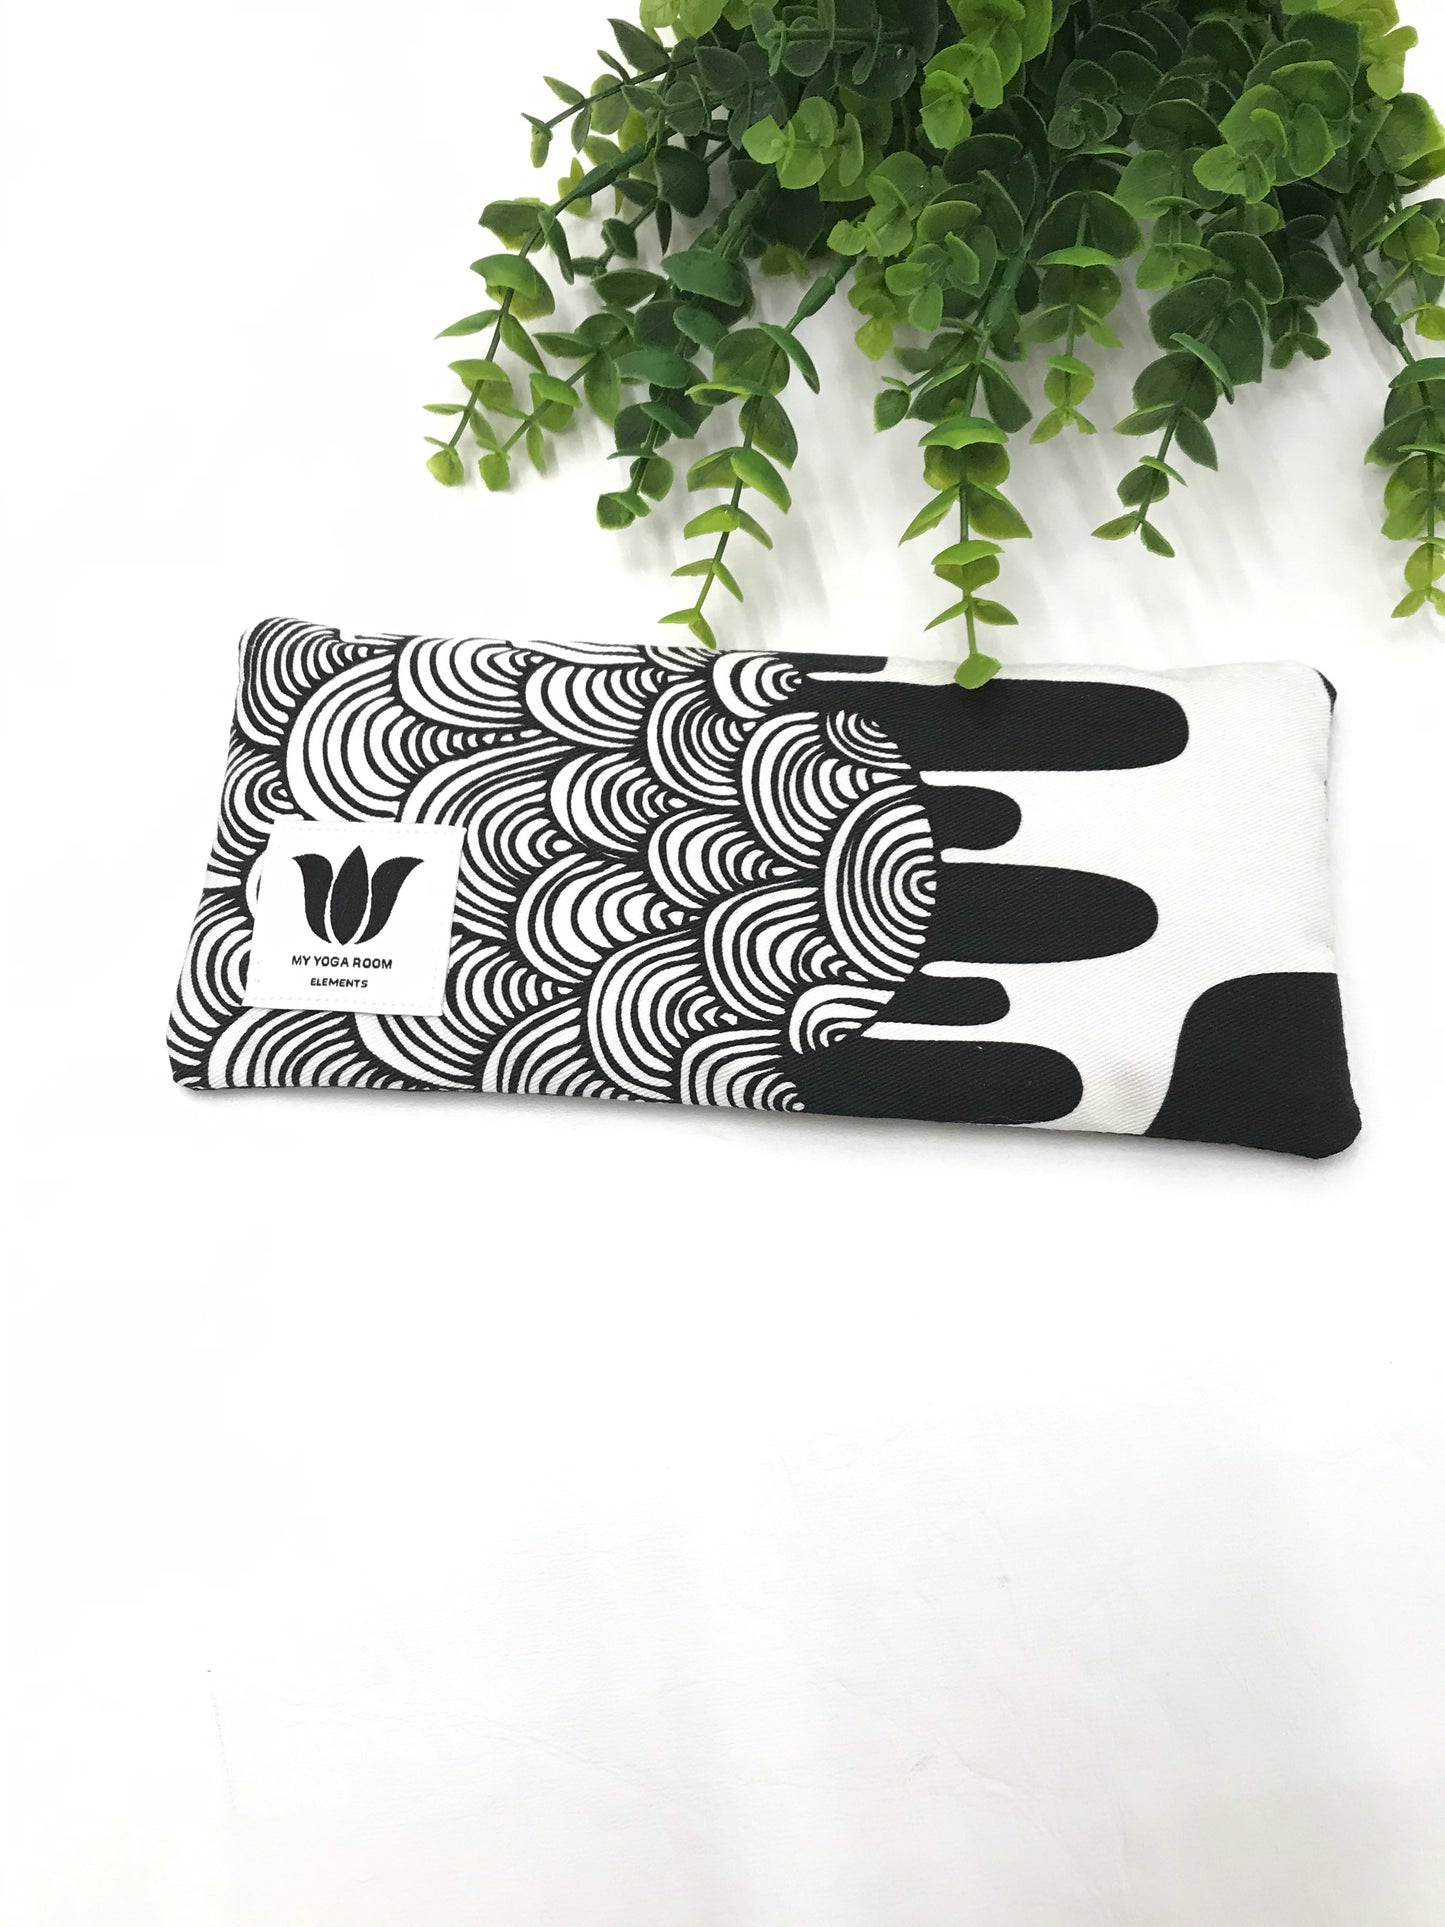 Yoga pillow, unscented, therapeutically weighted to soothe eye strain and stress or enhance your savasana. Handcrafted in Canada by My Yoga Room Elements. Blue modern graphic print and bamboo fabric.